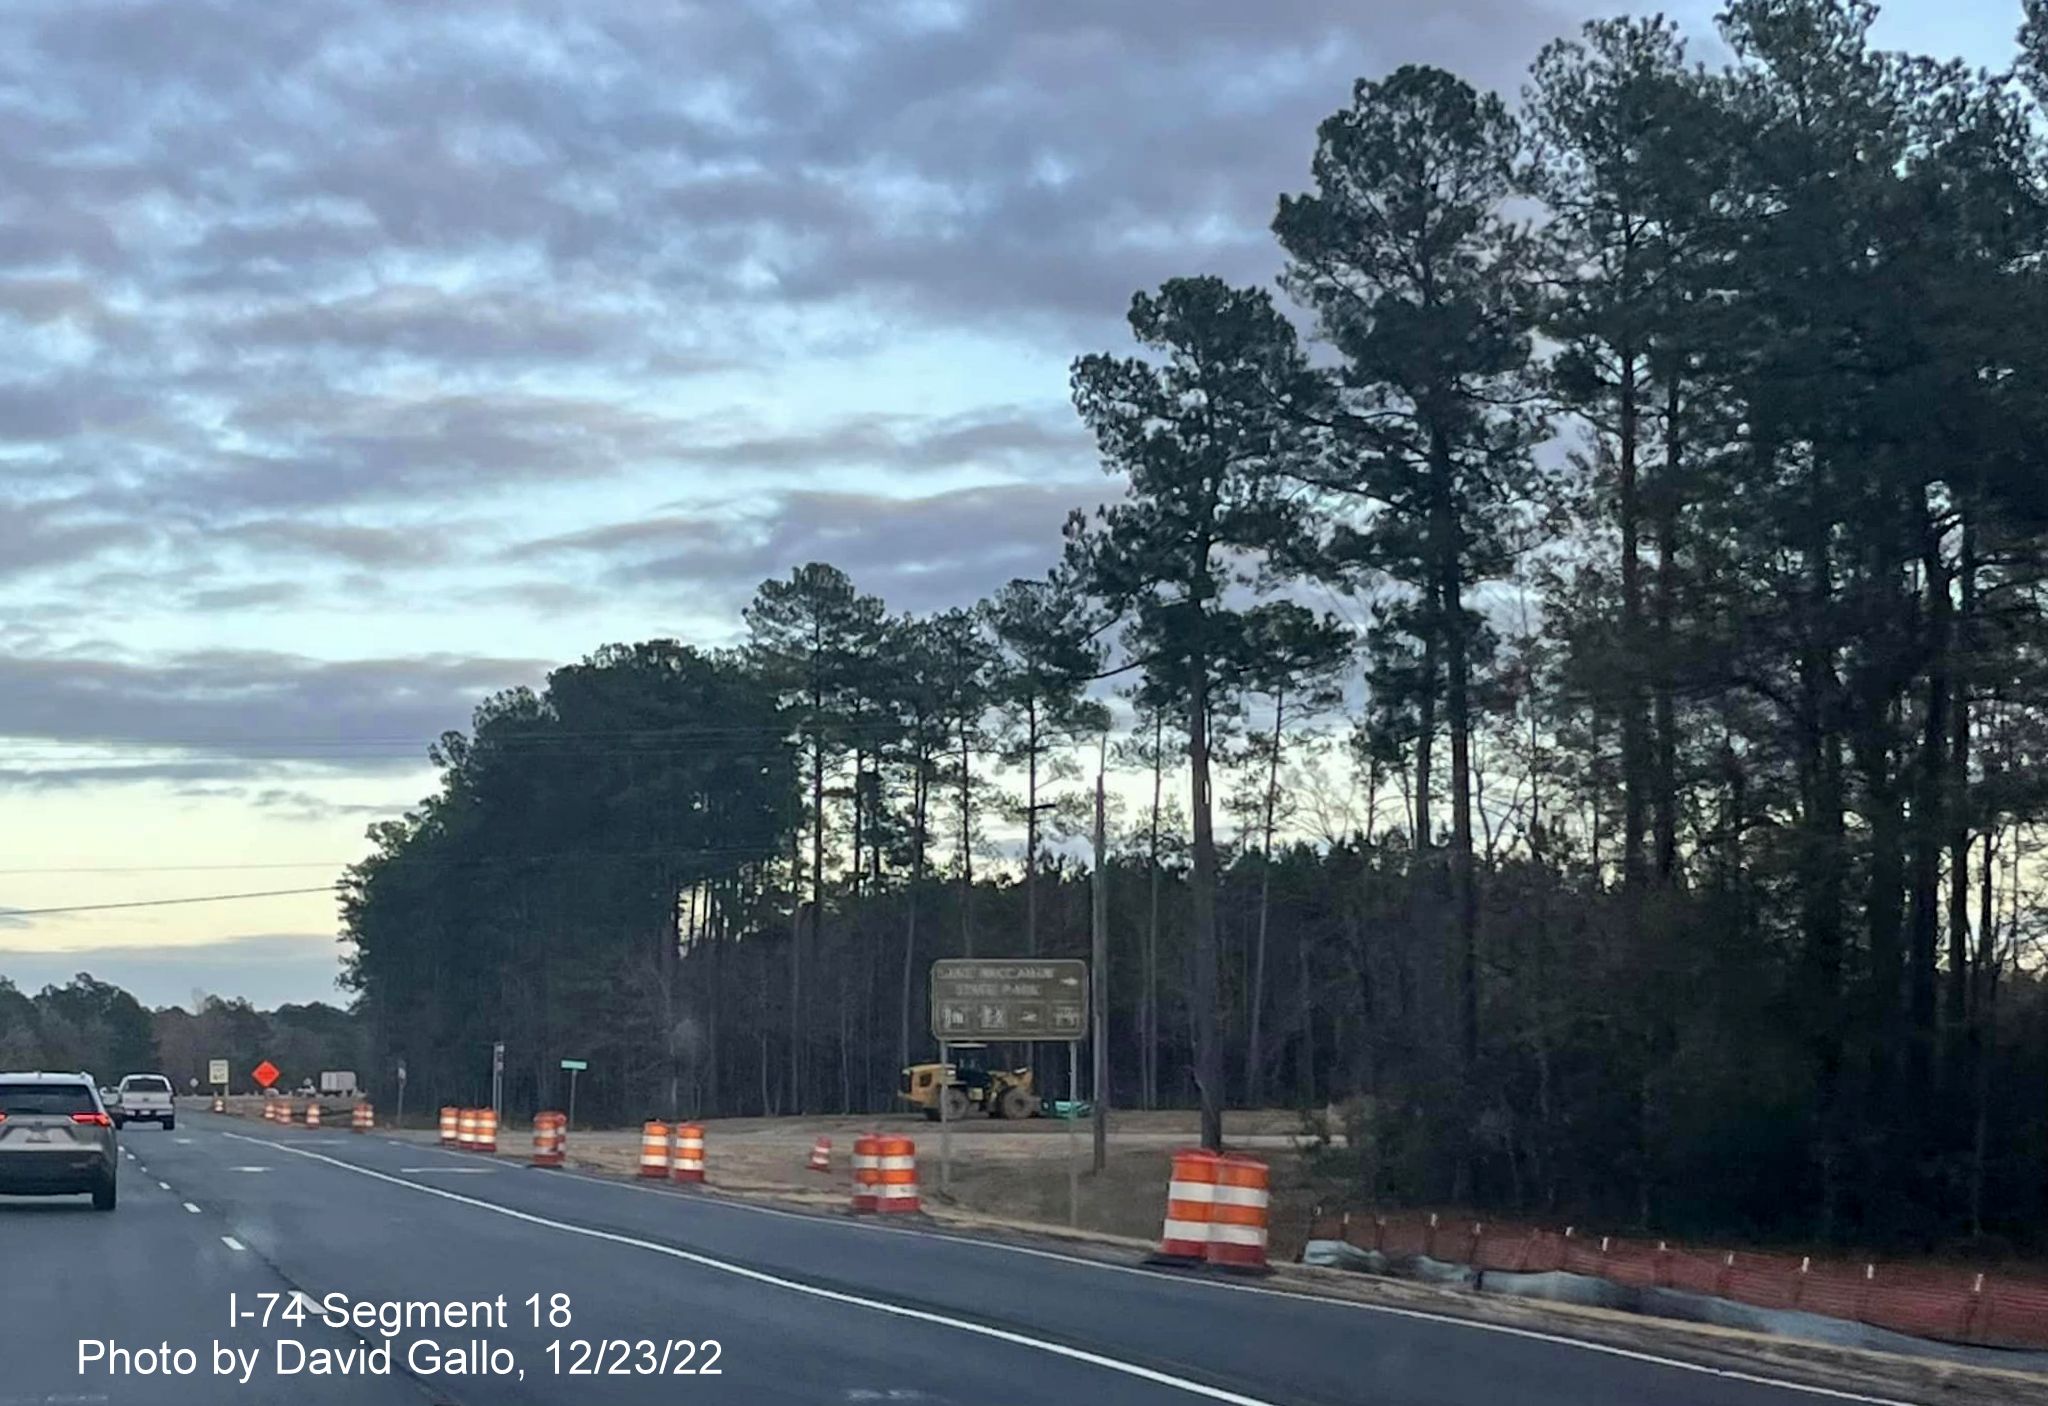 Image of approaching the Lake Waccamaw interchange work zone on US 74/76 East, by David Gallo, December 2022